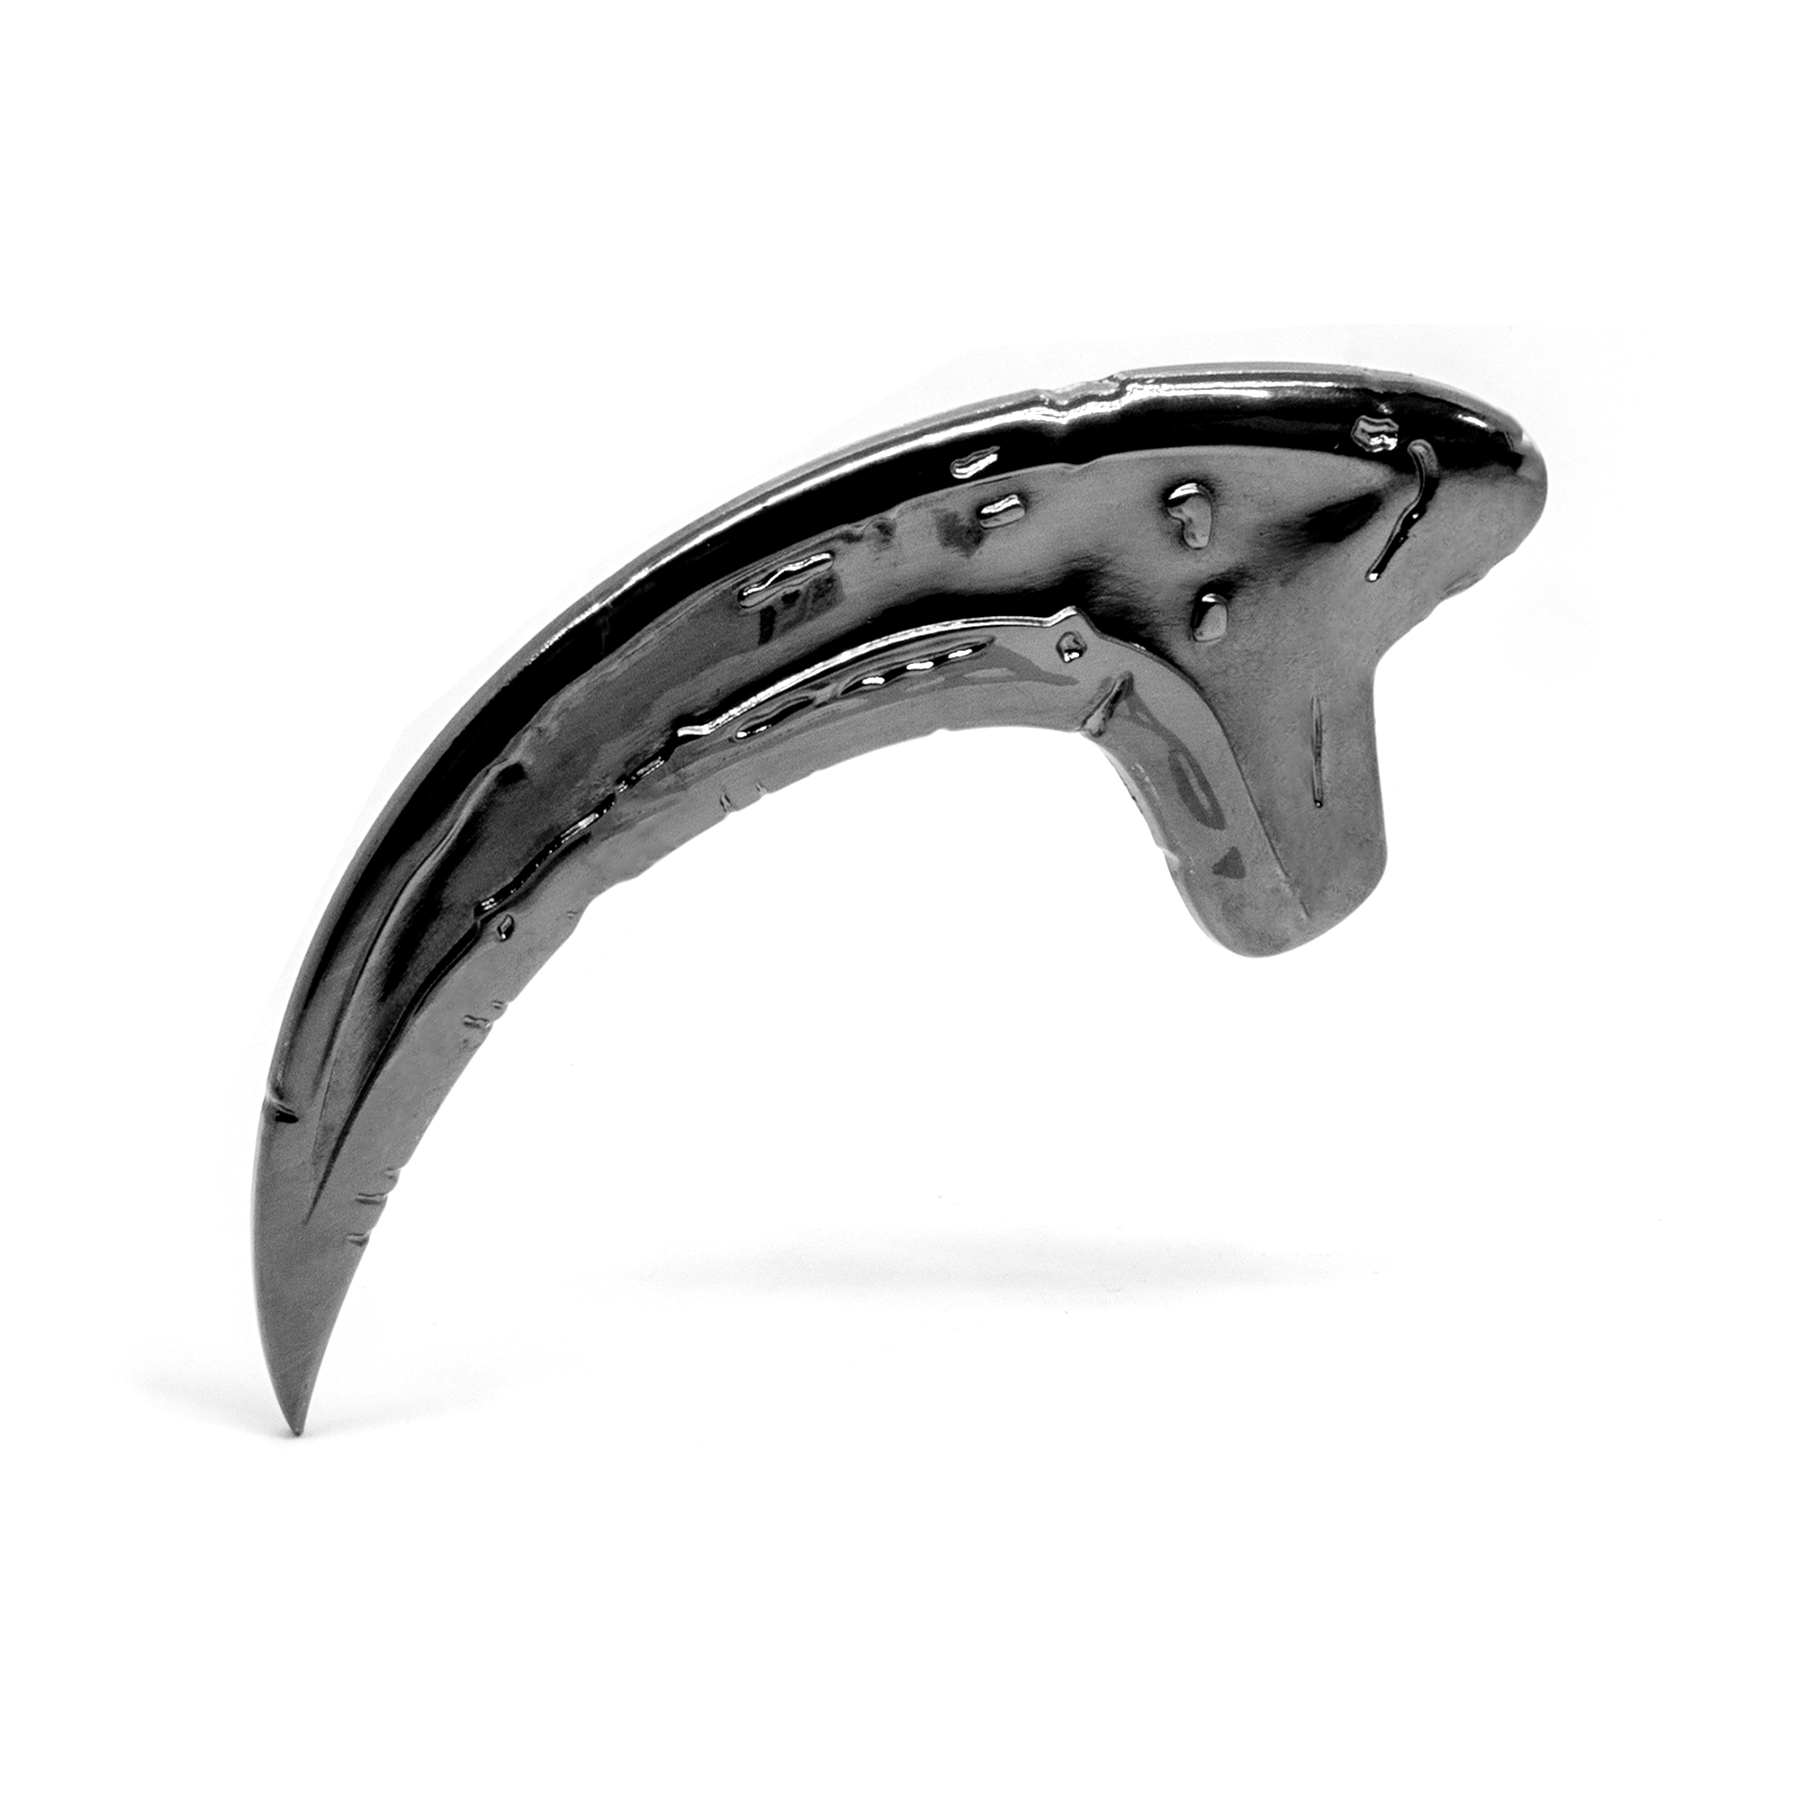 Large Raptor Claw molded pin